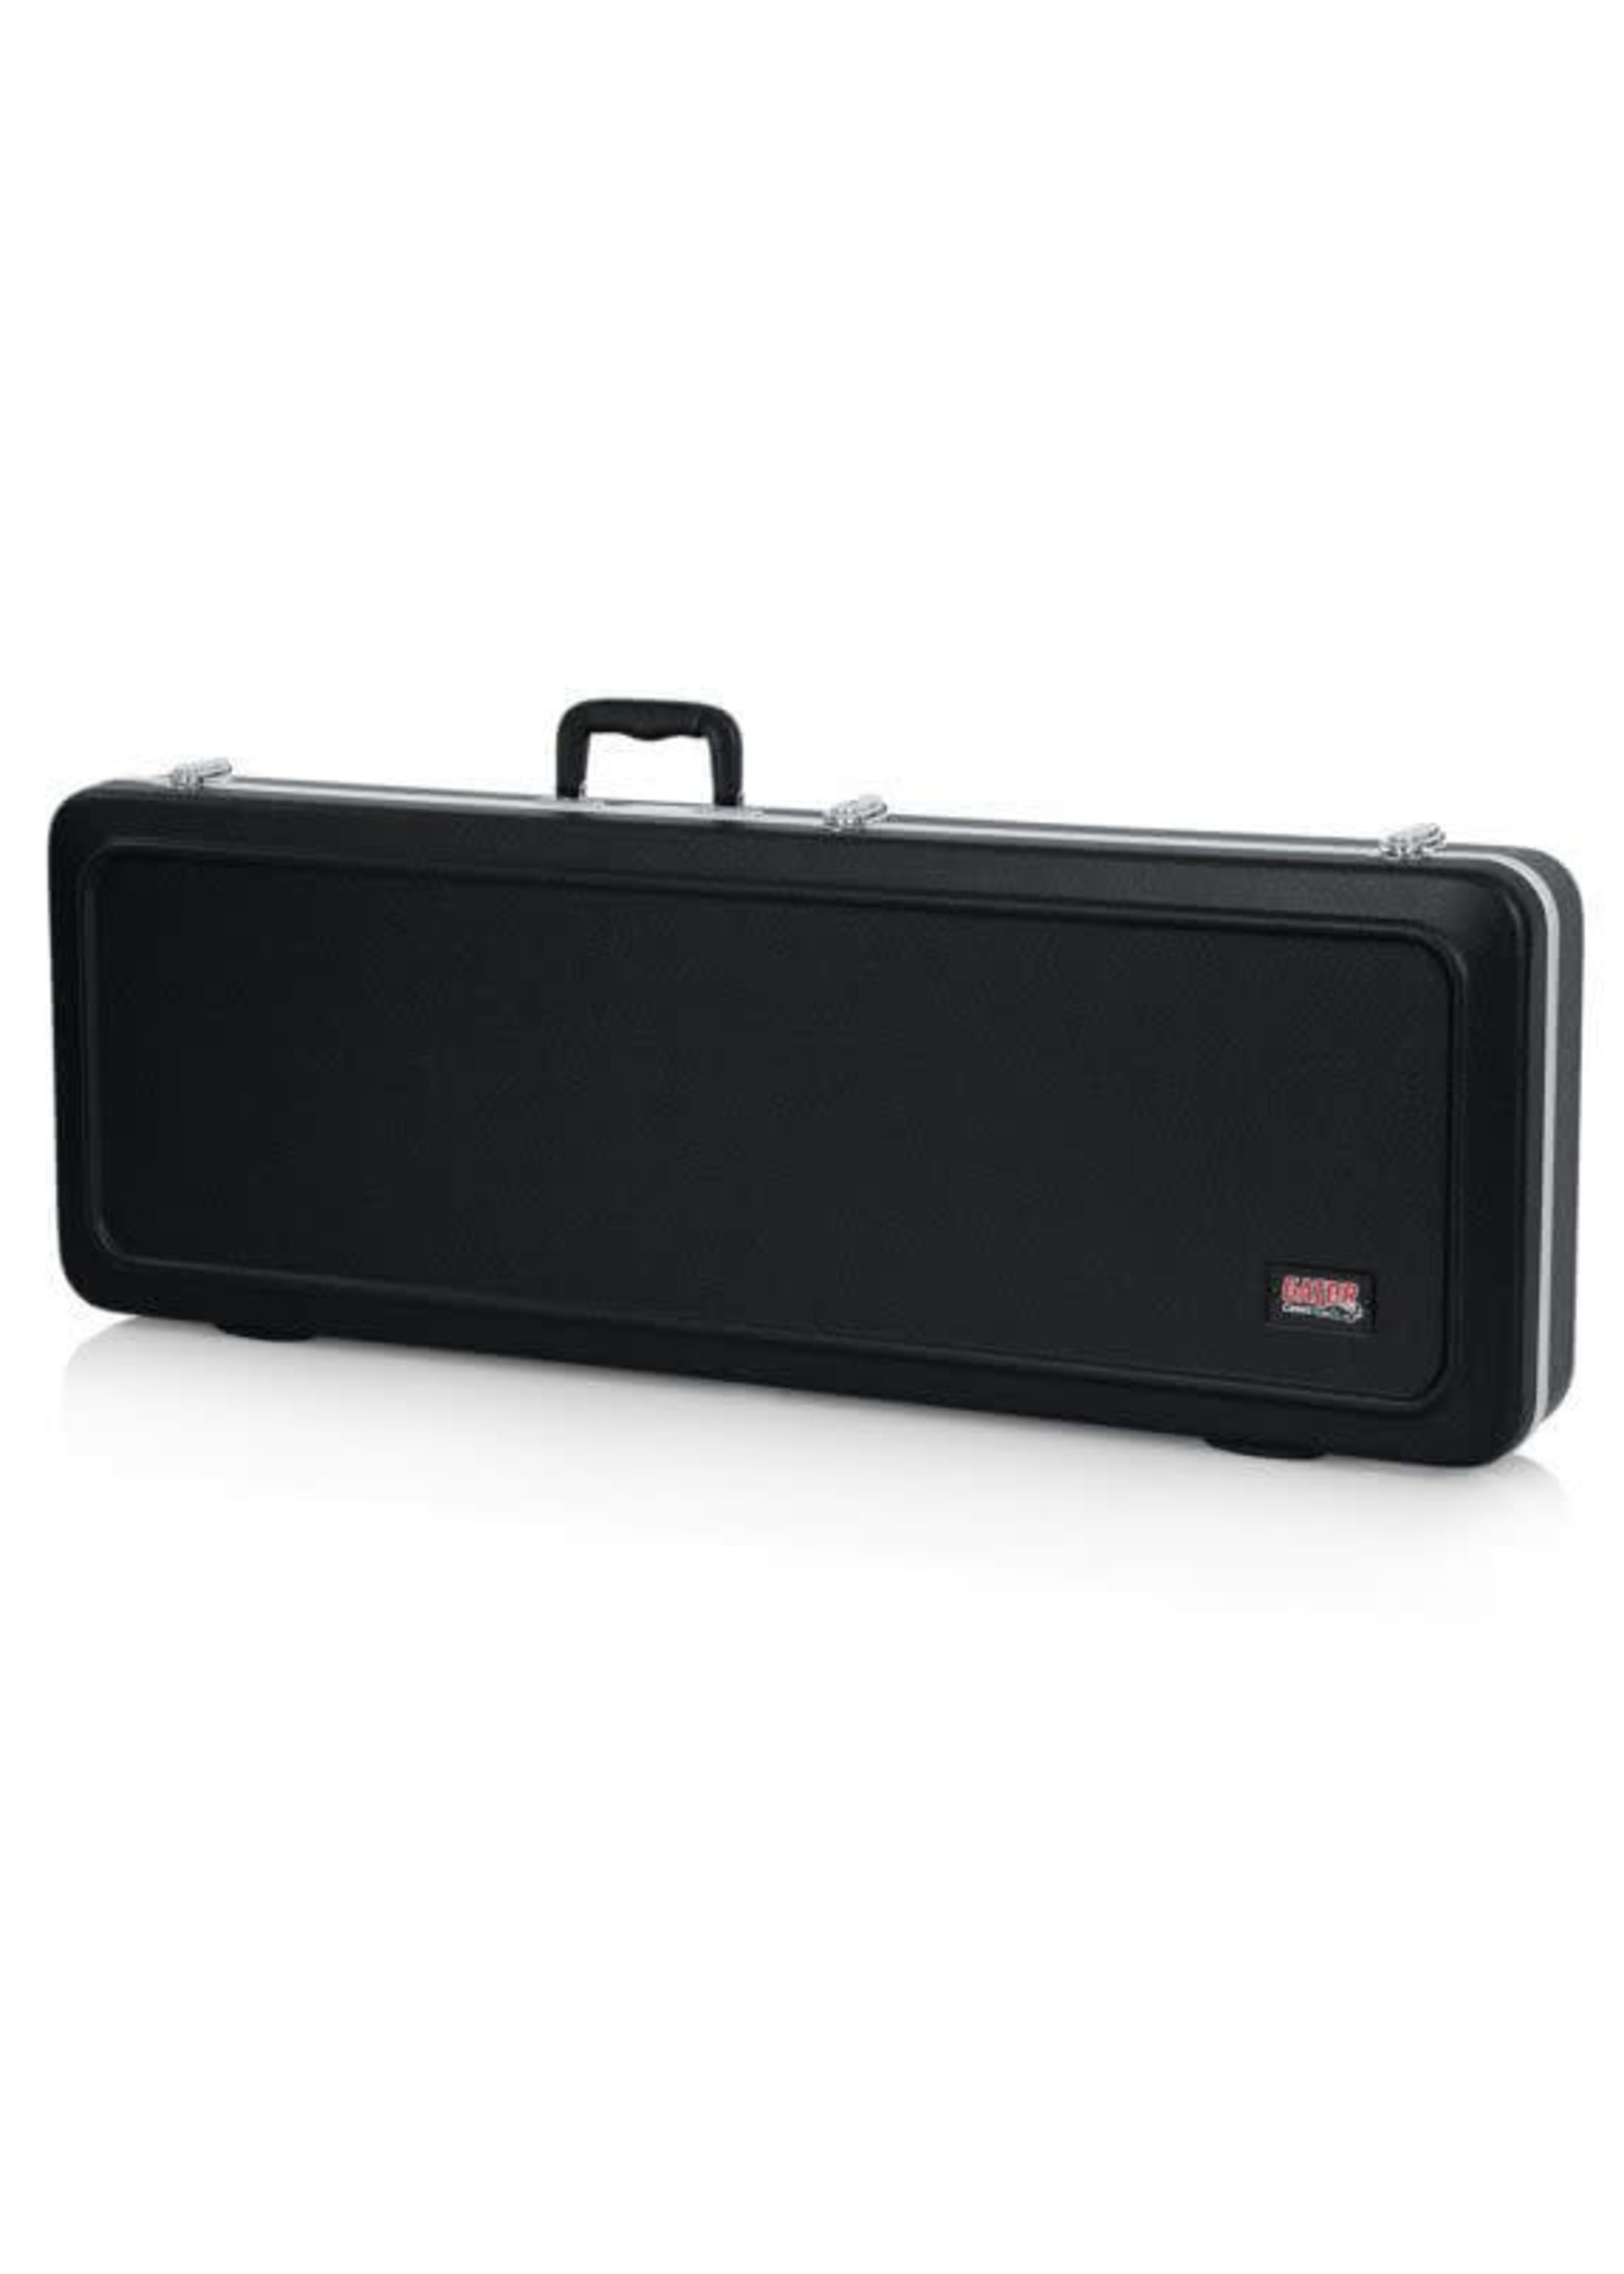 Gator Gator Cases GC-ELECTRIC-A Deluxe Molded Case for Electric Guitars, Black